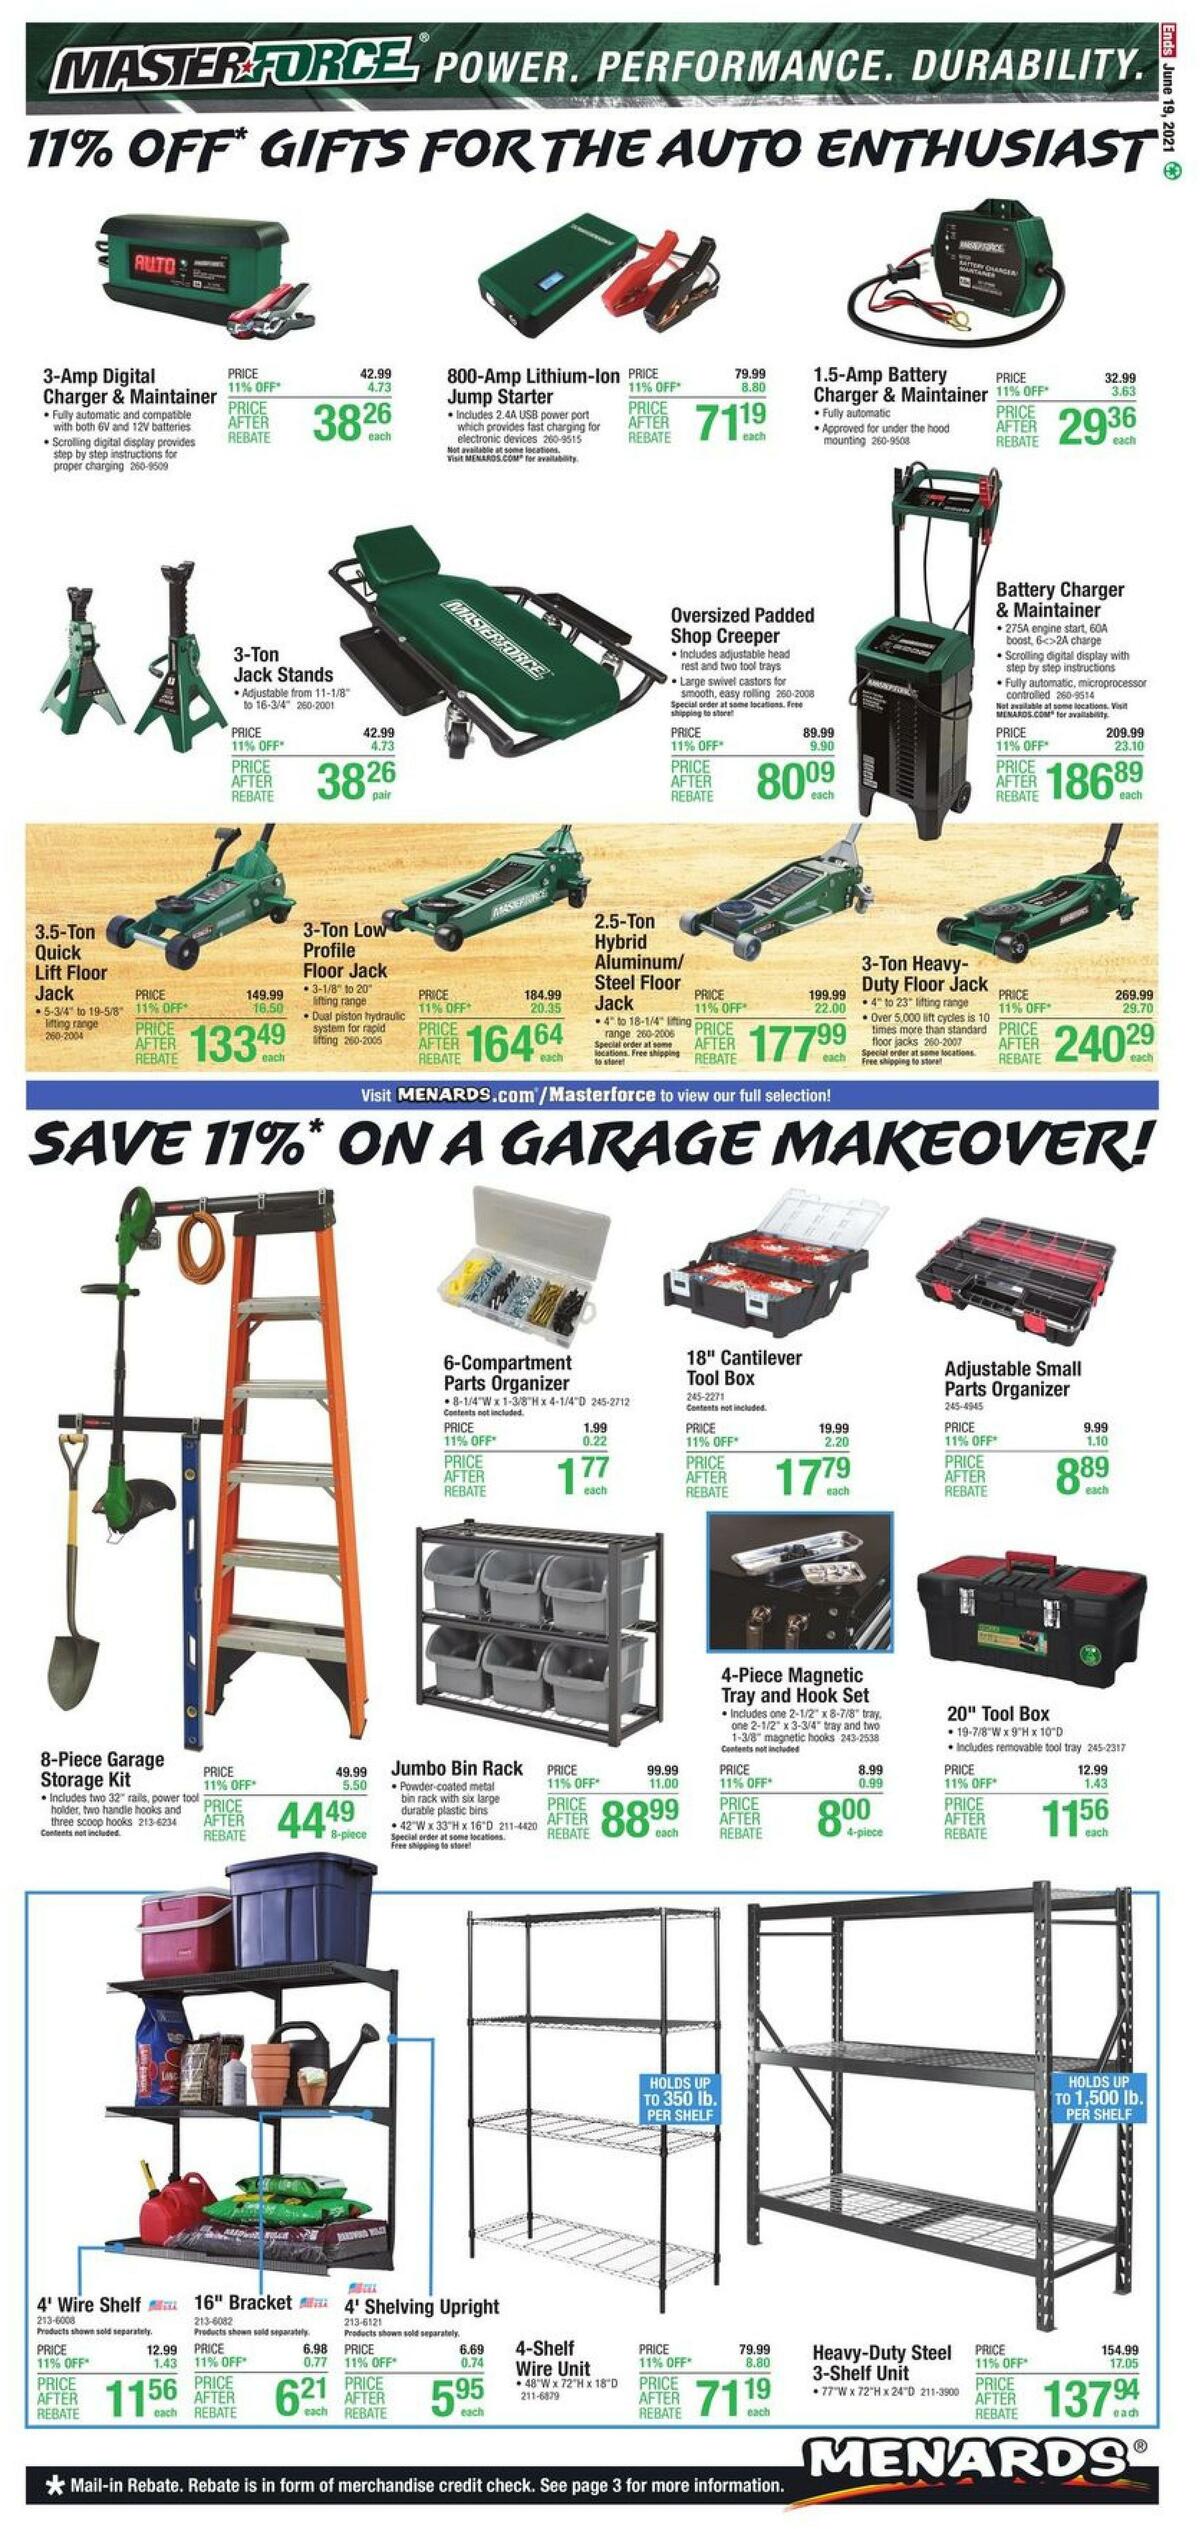 Menards Tools Weekly Ad from June 10